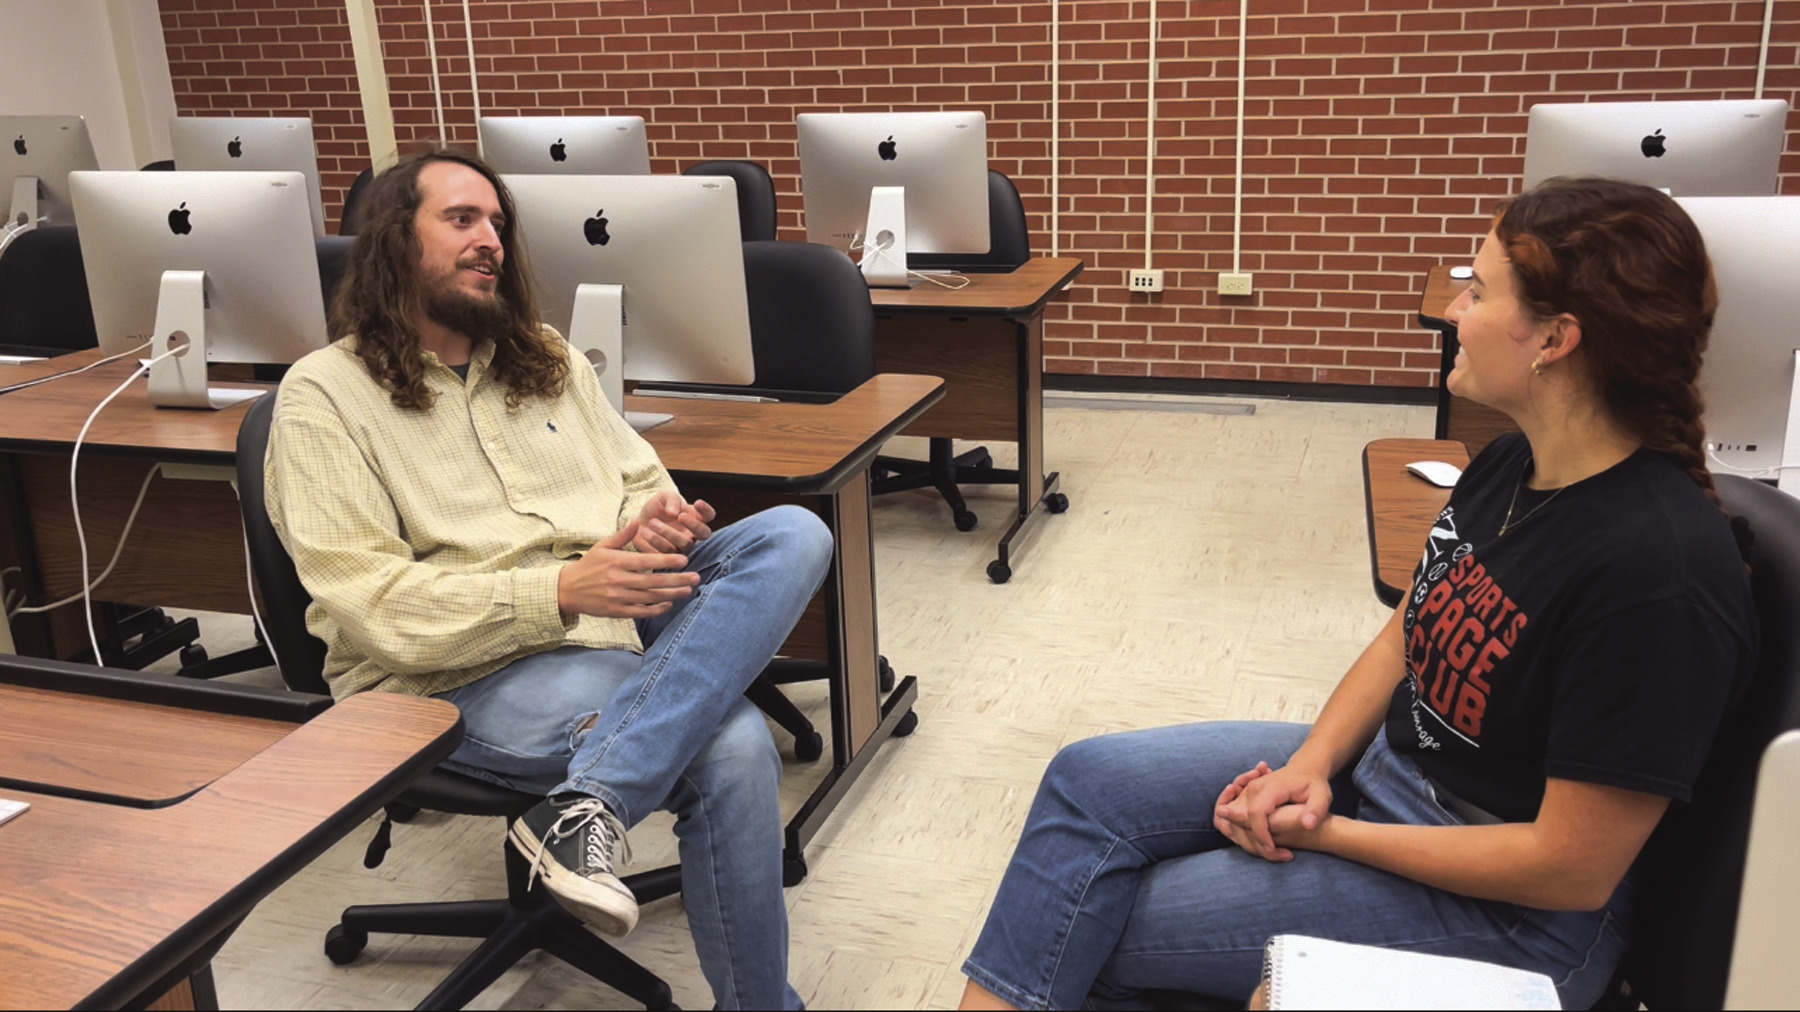 SWOSU assistant professor Chad Gray shares about his classes with WDN reporter Kimberly Lippencott. Kiersten Stone/lWDN